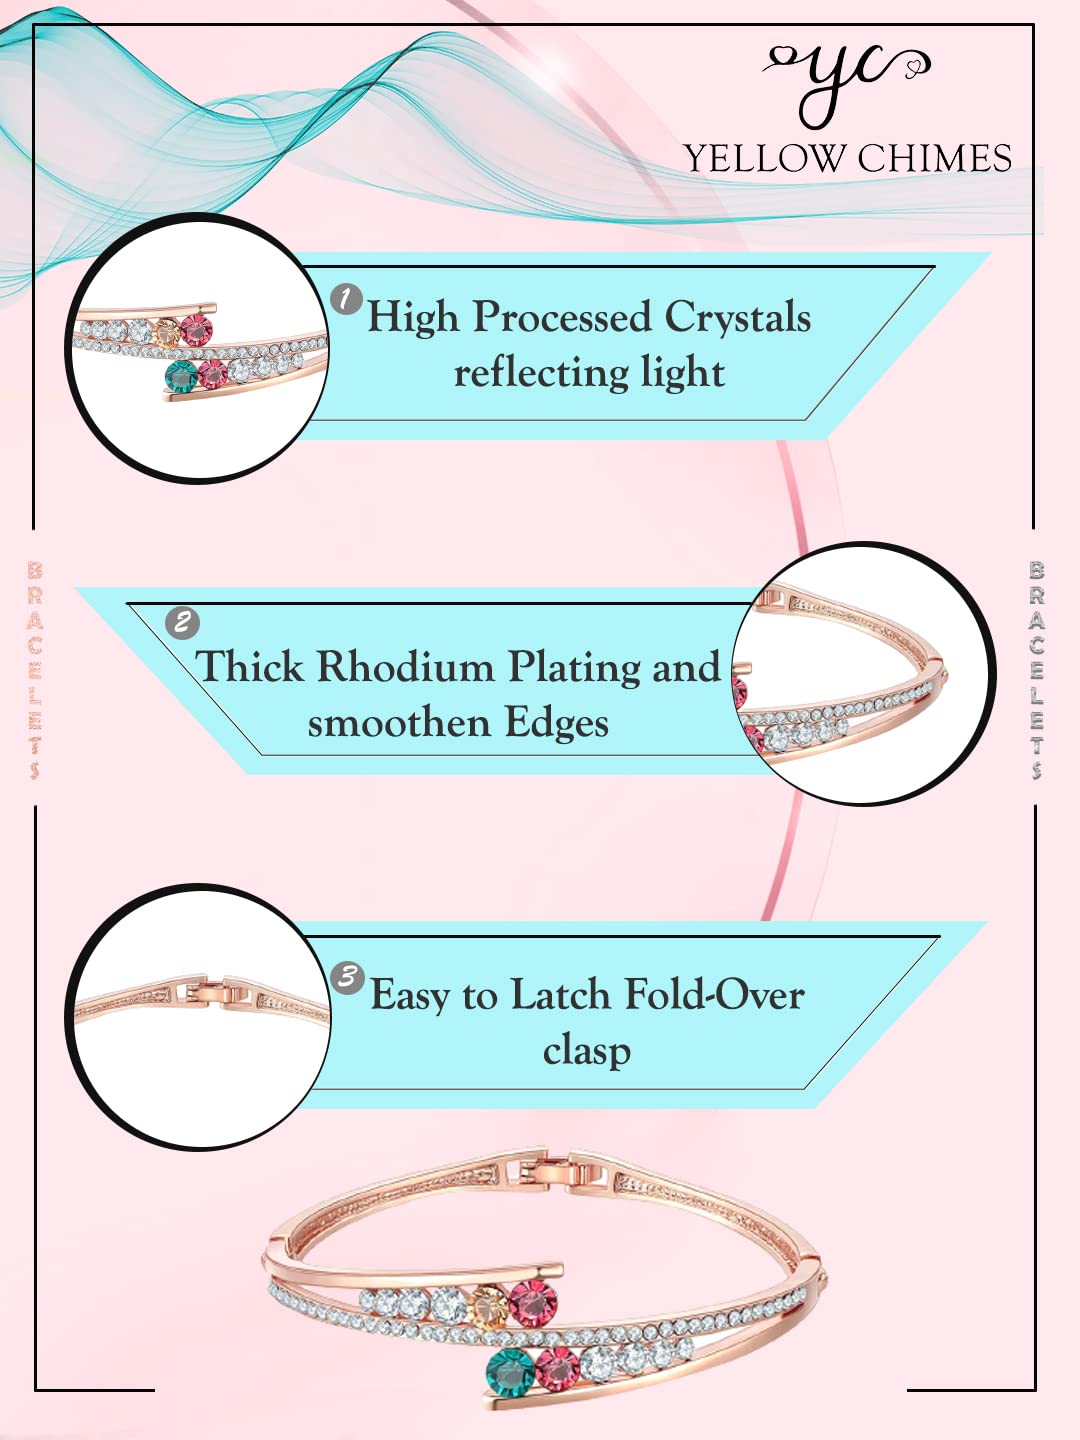 Yellow Chimes Bracelet For Women| Fashion Rose Gold Cubic Zirconia Crystal Style Bracelets For Women And Girls | Rose Gold Plated Crystal Bracelet | Accessories Jewellery|Birthday And Anniversary Gift